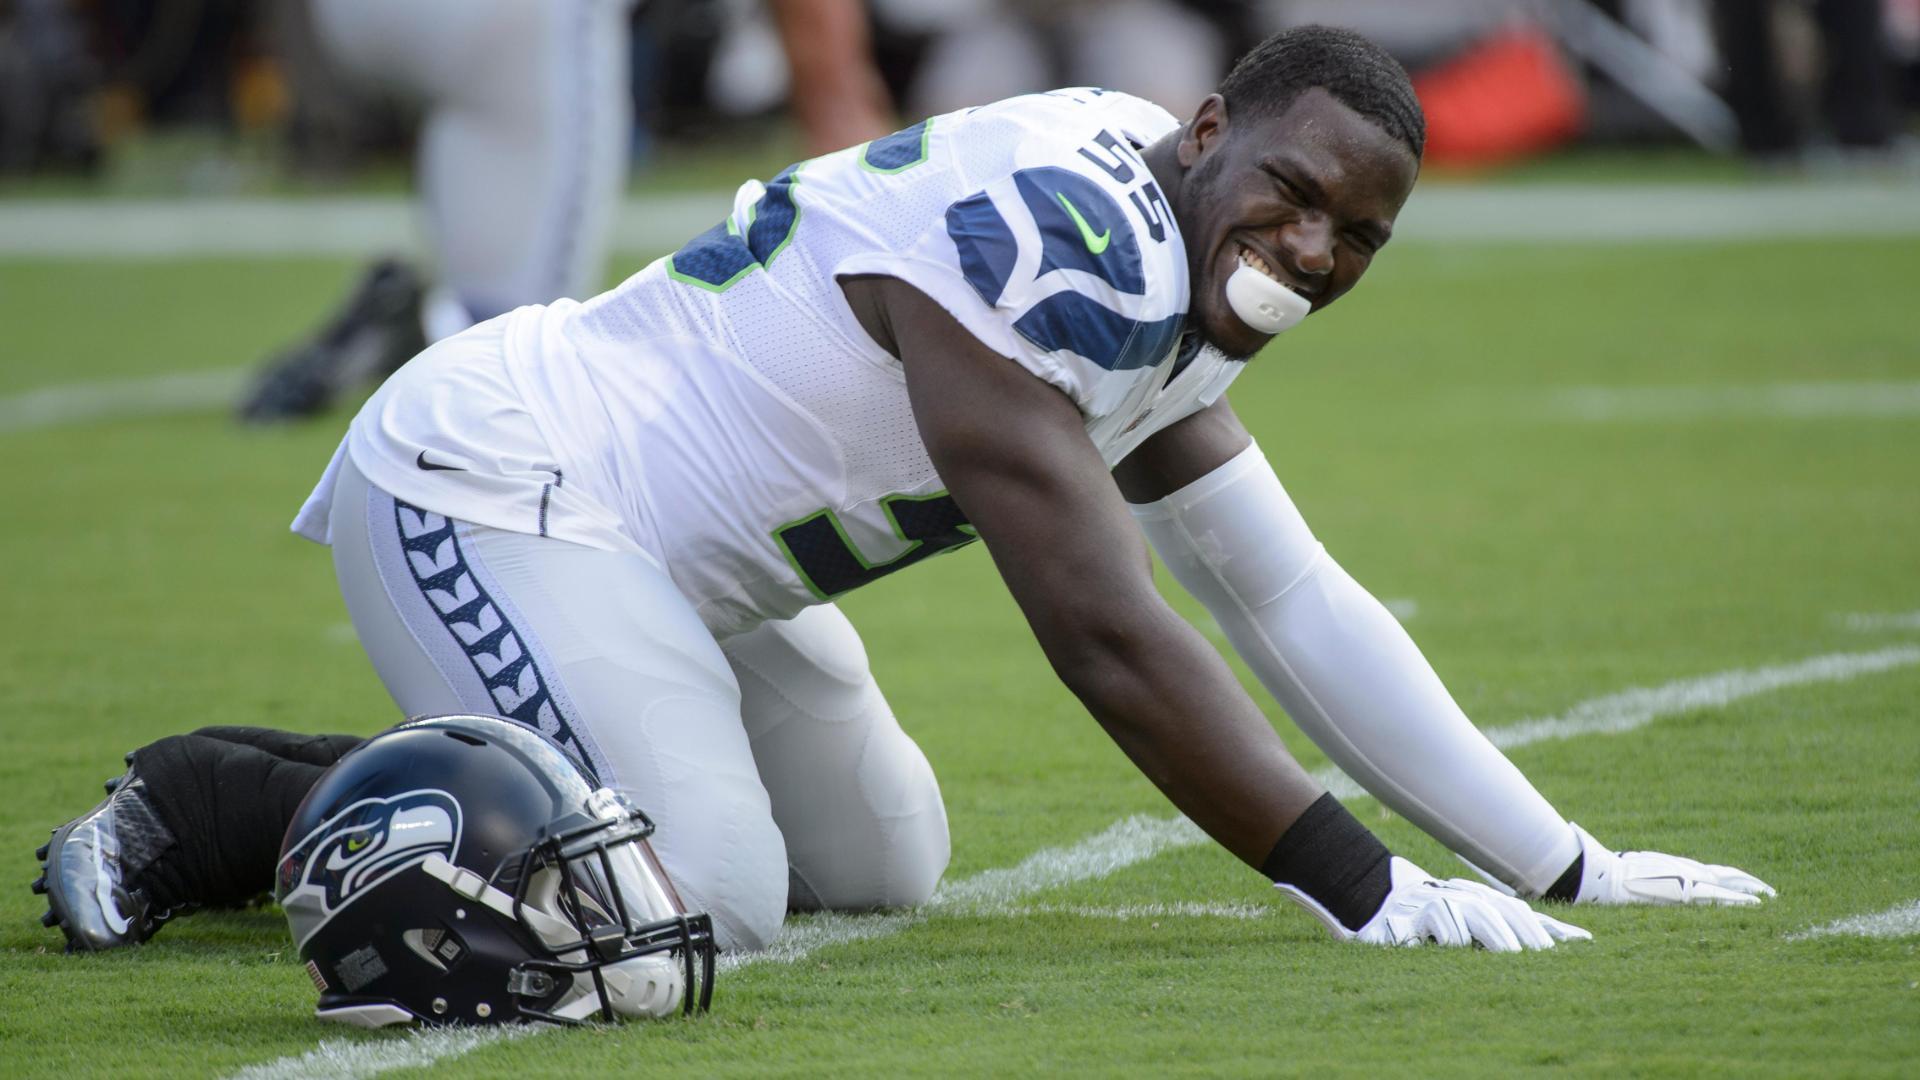 Philip Rivers: Scuffle with Seahawks' Frank Clark 'fun' but not big